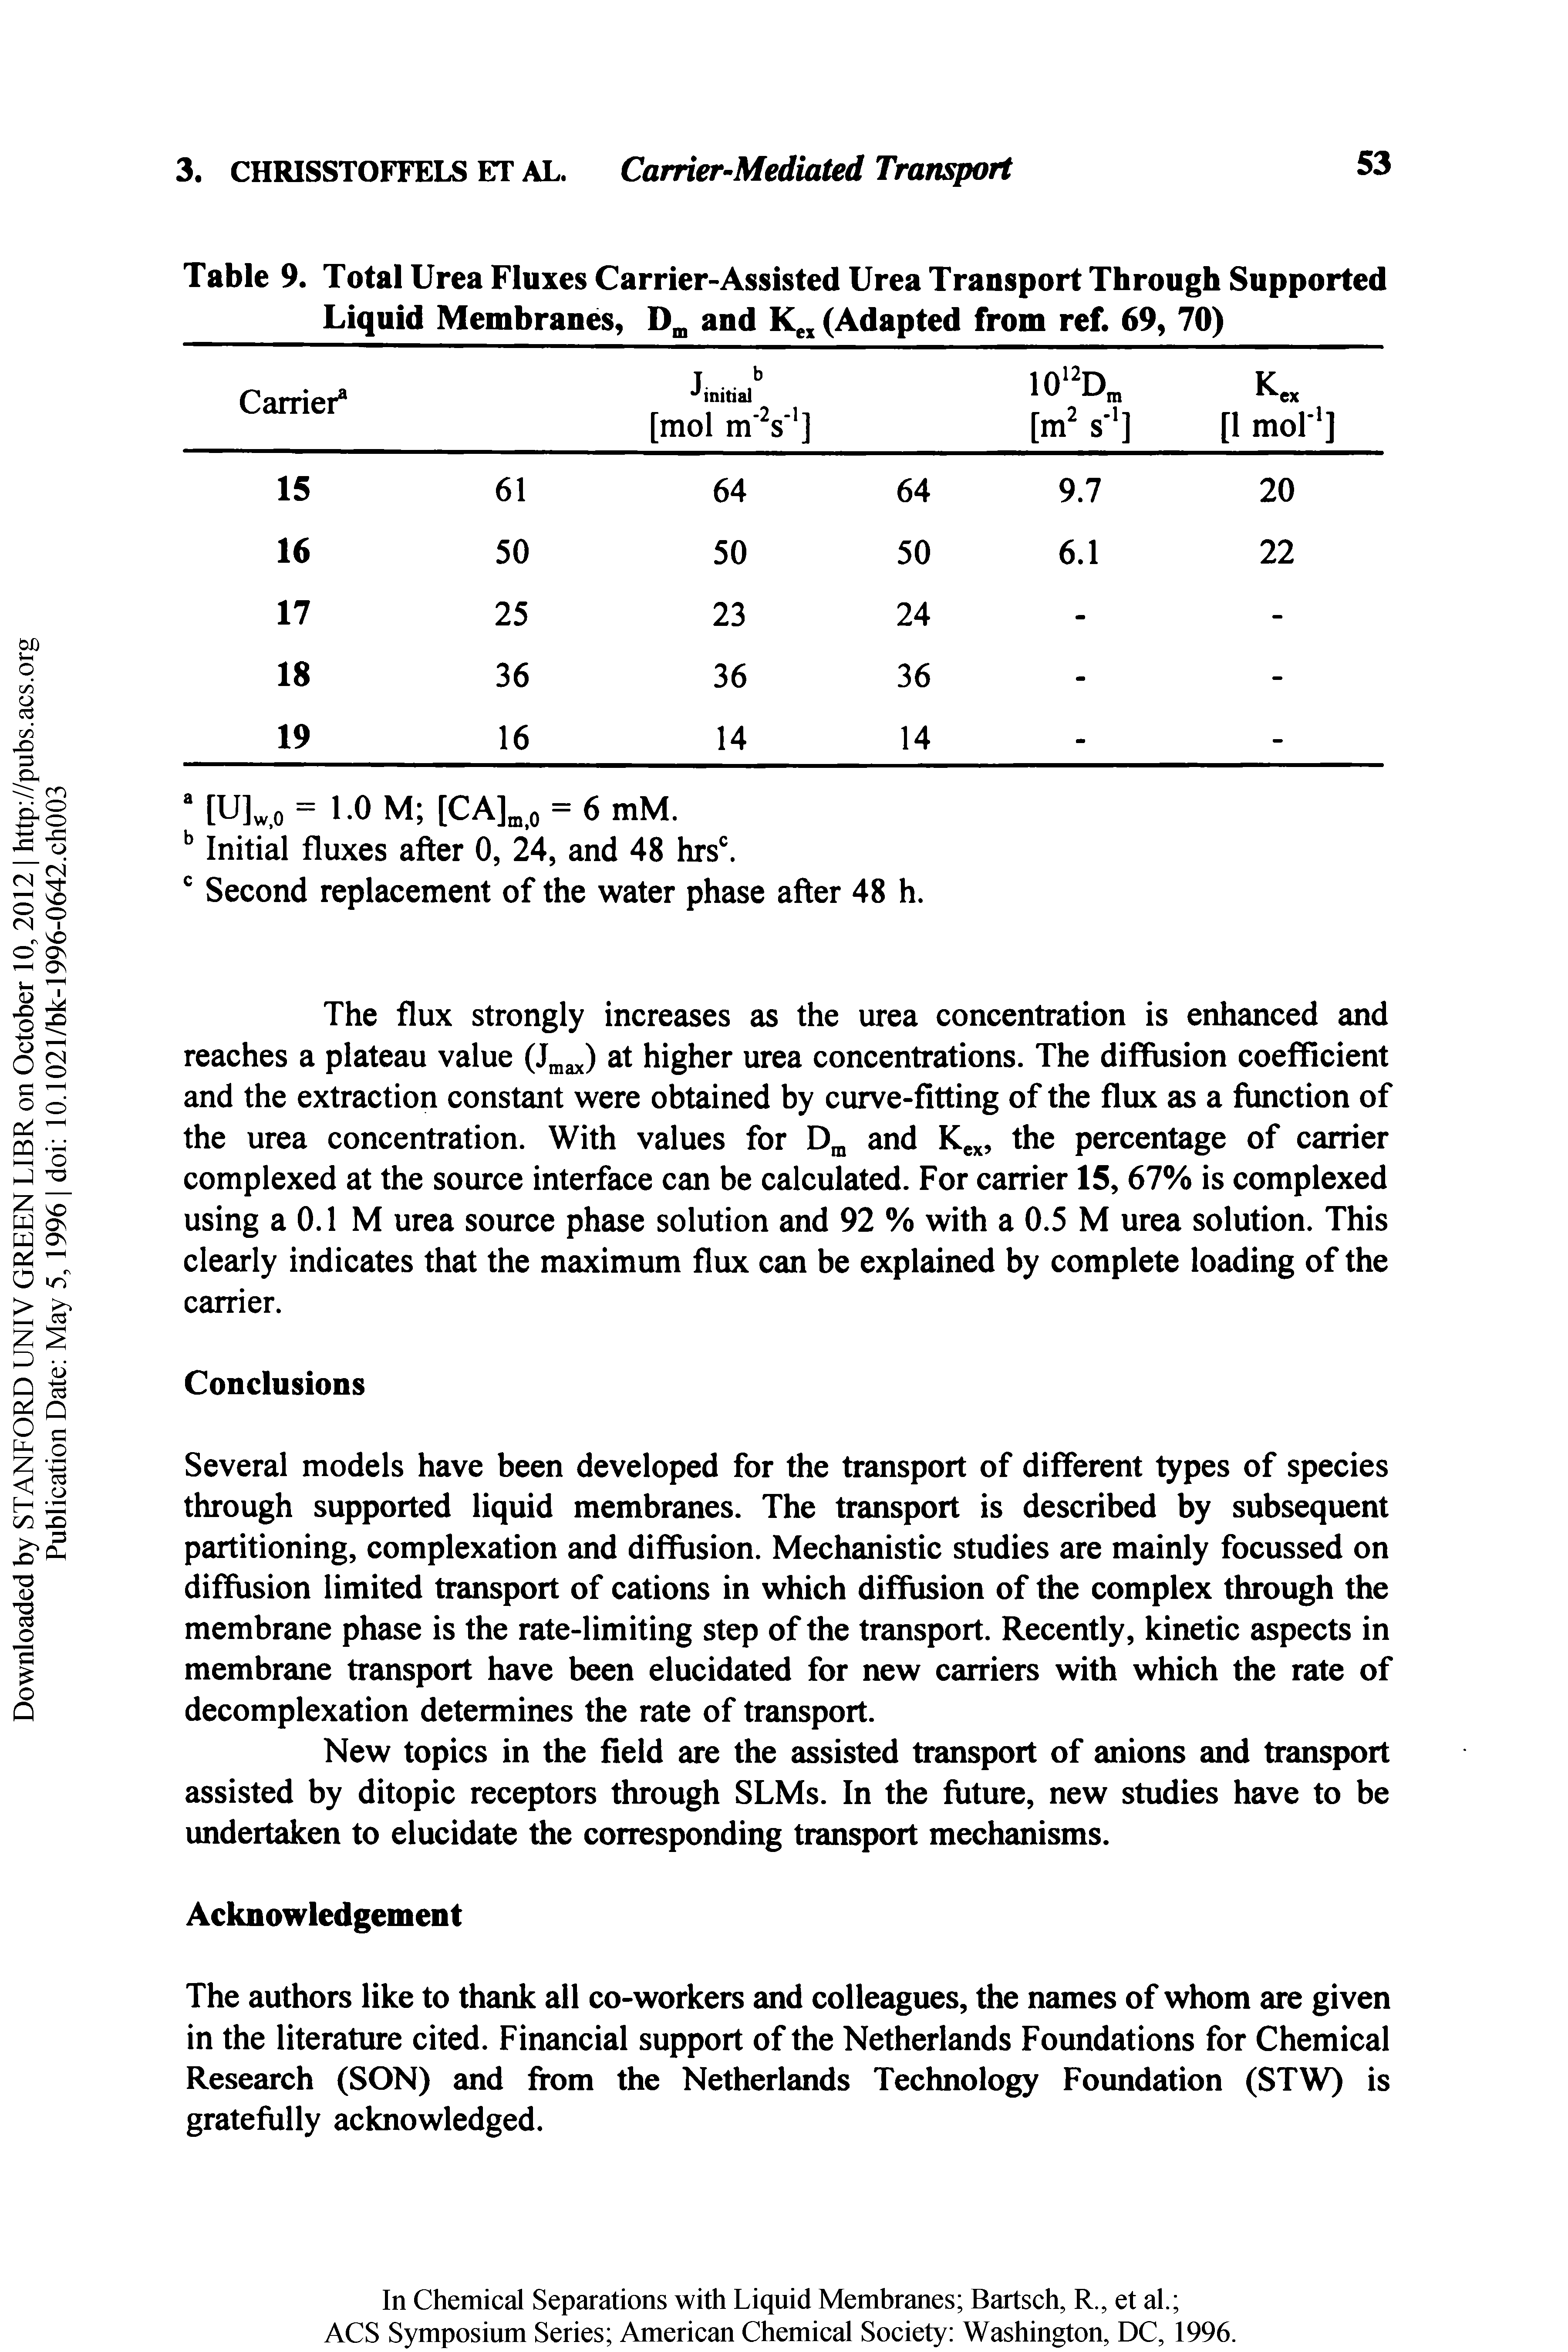 Table 9. Total Urea Fluxes Carrier-Assisted Urea Transport Through Supported Liquid Membranes, and (Adapted from ref. 69, 70) ...